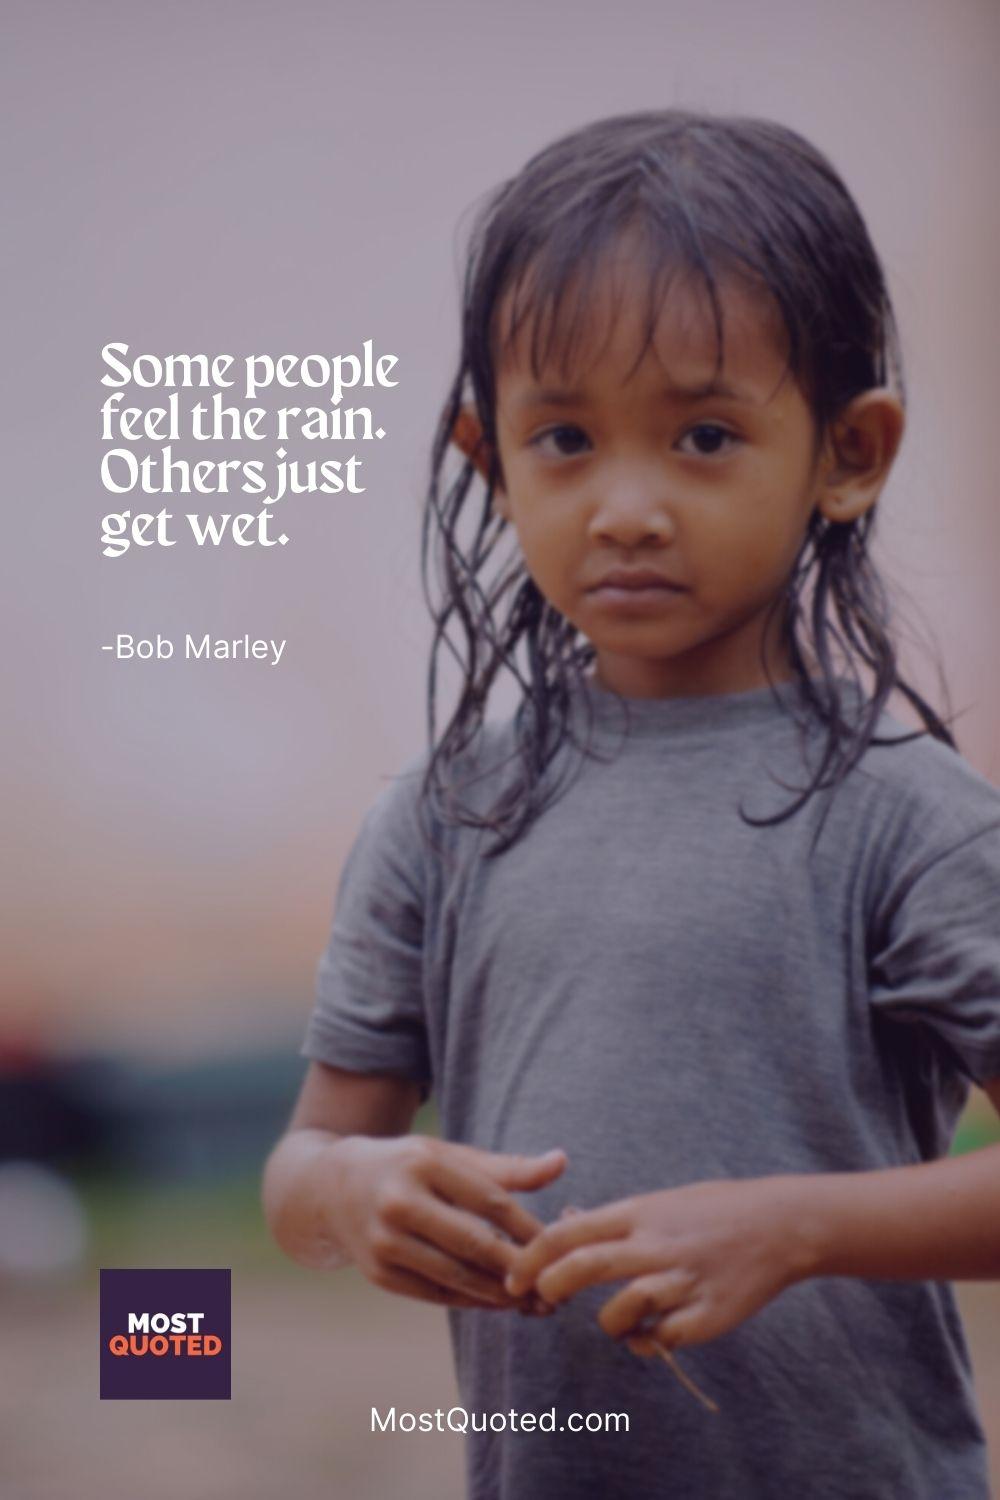 Some people feel the rain. Others just get wet. - Bob Marley